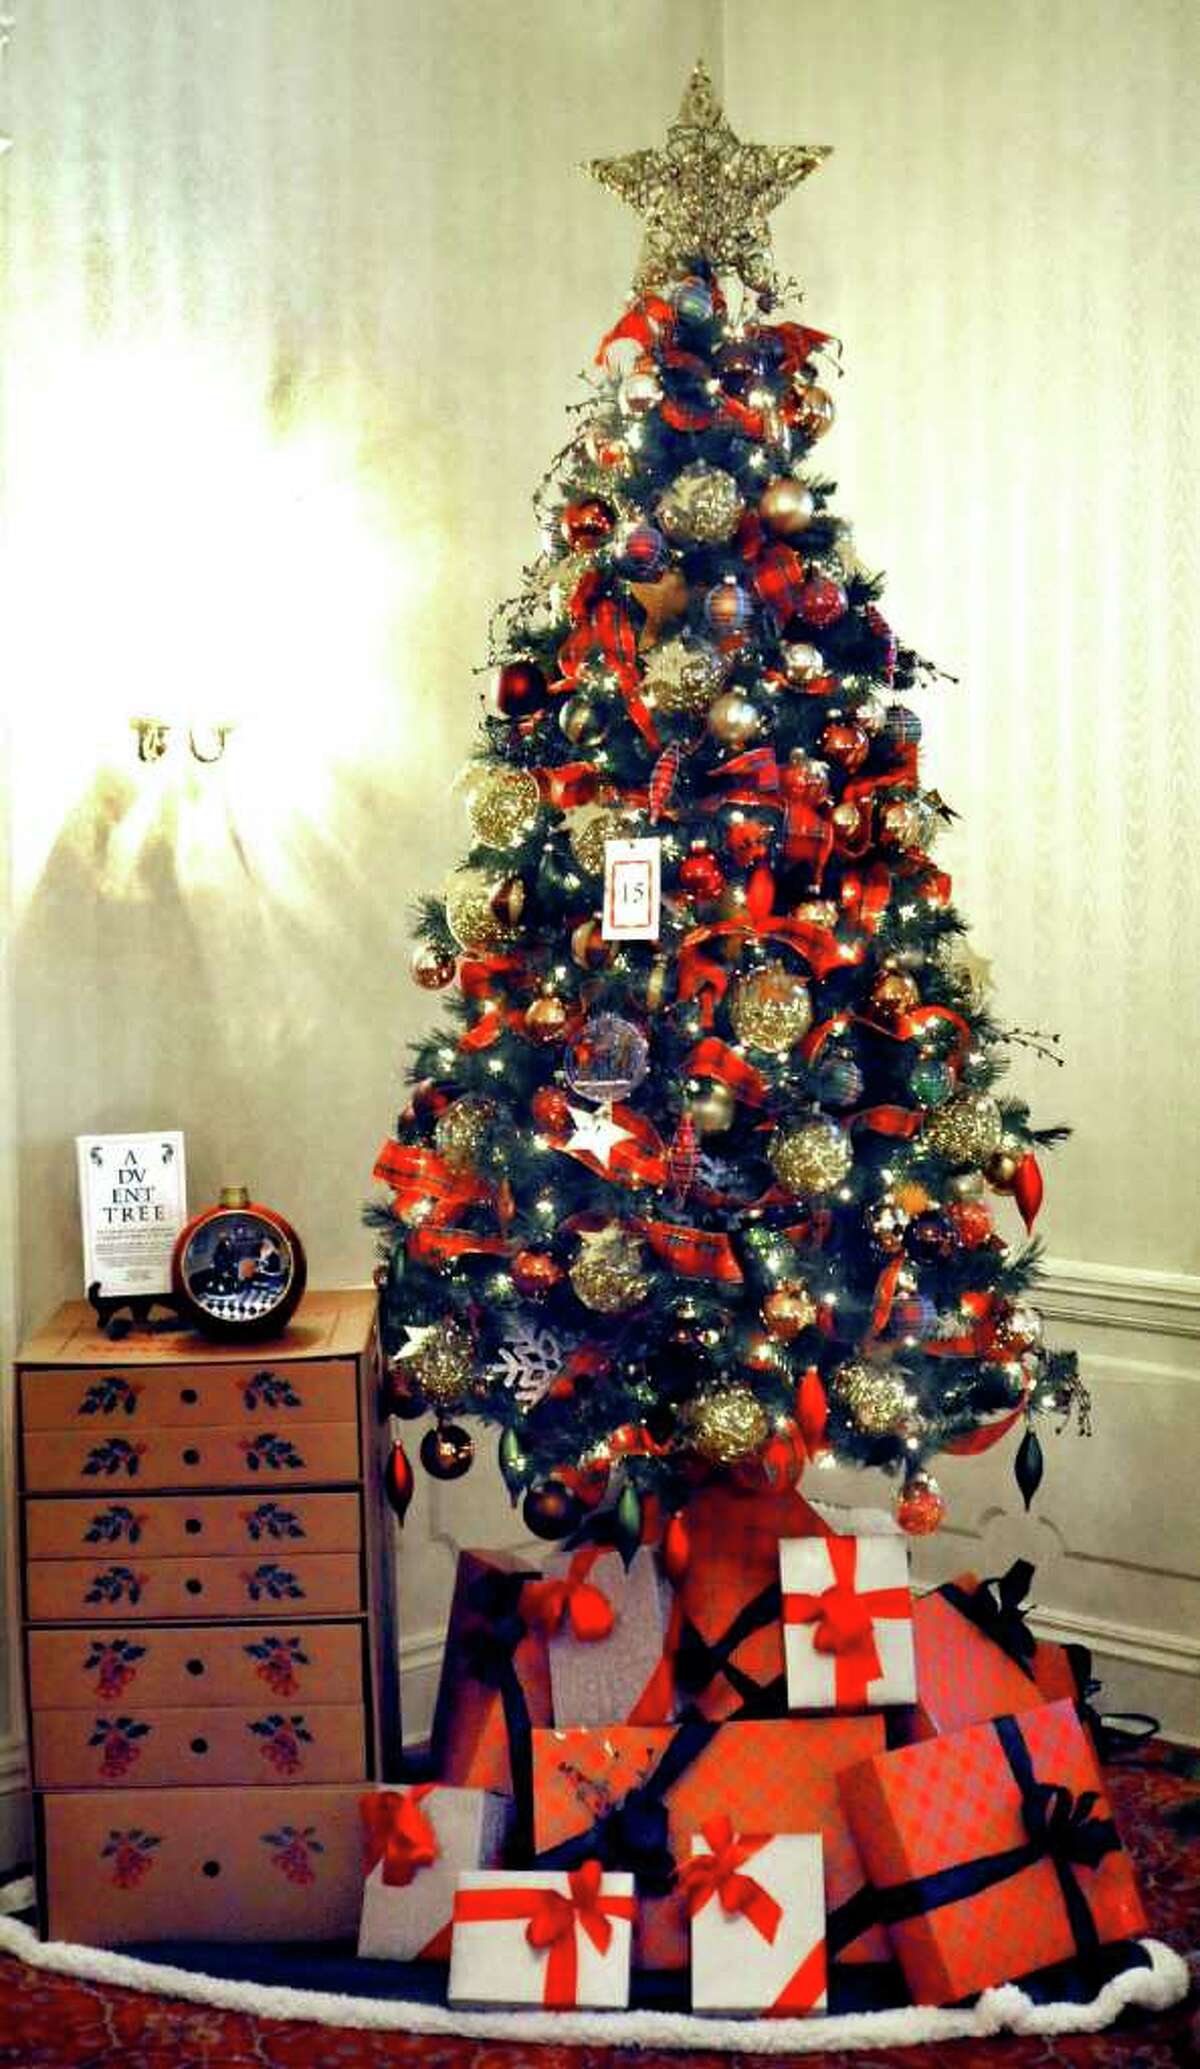 This Advent calendar tree submitted to The Festival of Trees at the Ridgefield Community Center by Neuman Real Estate and Christies International has been chosen best in show Thursday, Nov. 17, 2011.